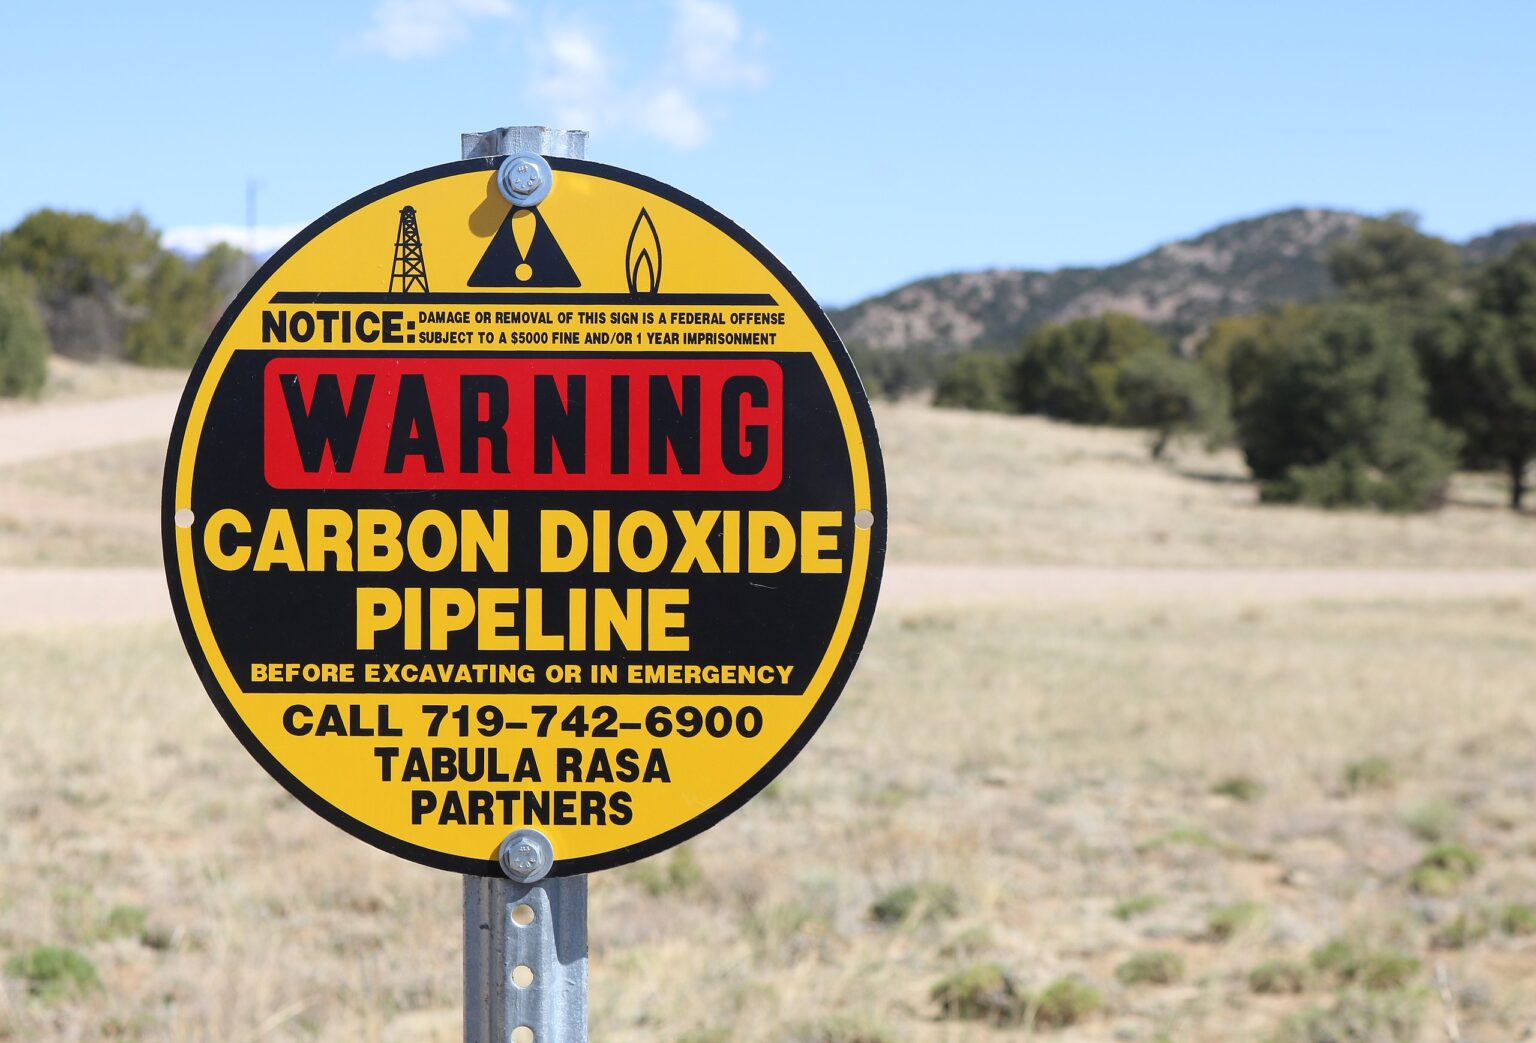 A yellow, black, and red metal sign warning of a buried carbon dioxide pipeline in arid rural country with hills and a few shrubs.